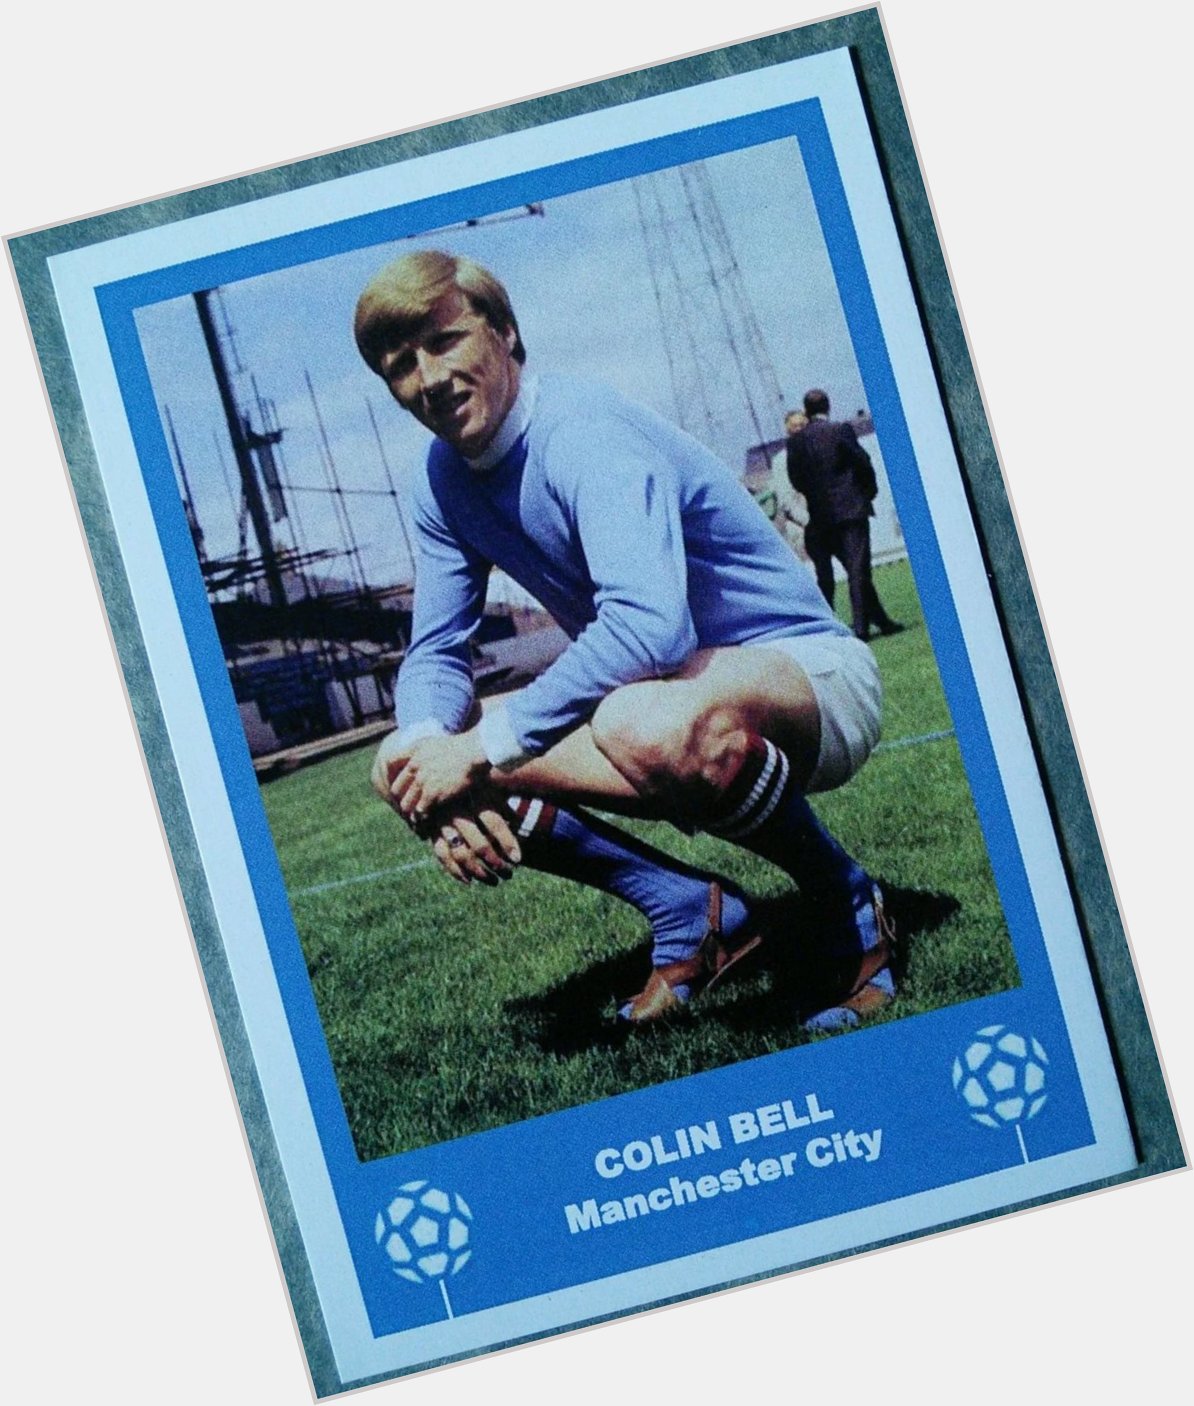 Happy Birthday Colin Bell 71 today. 
Dig those boots! 